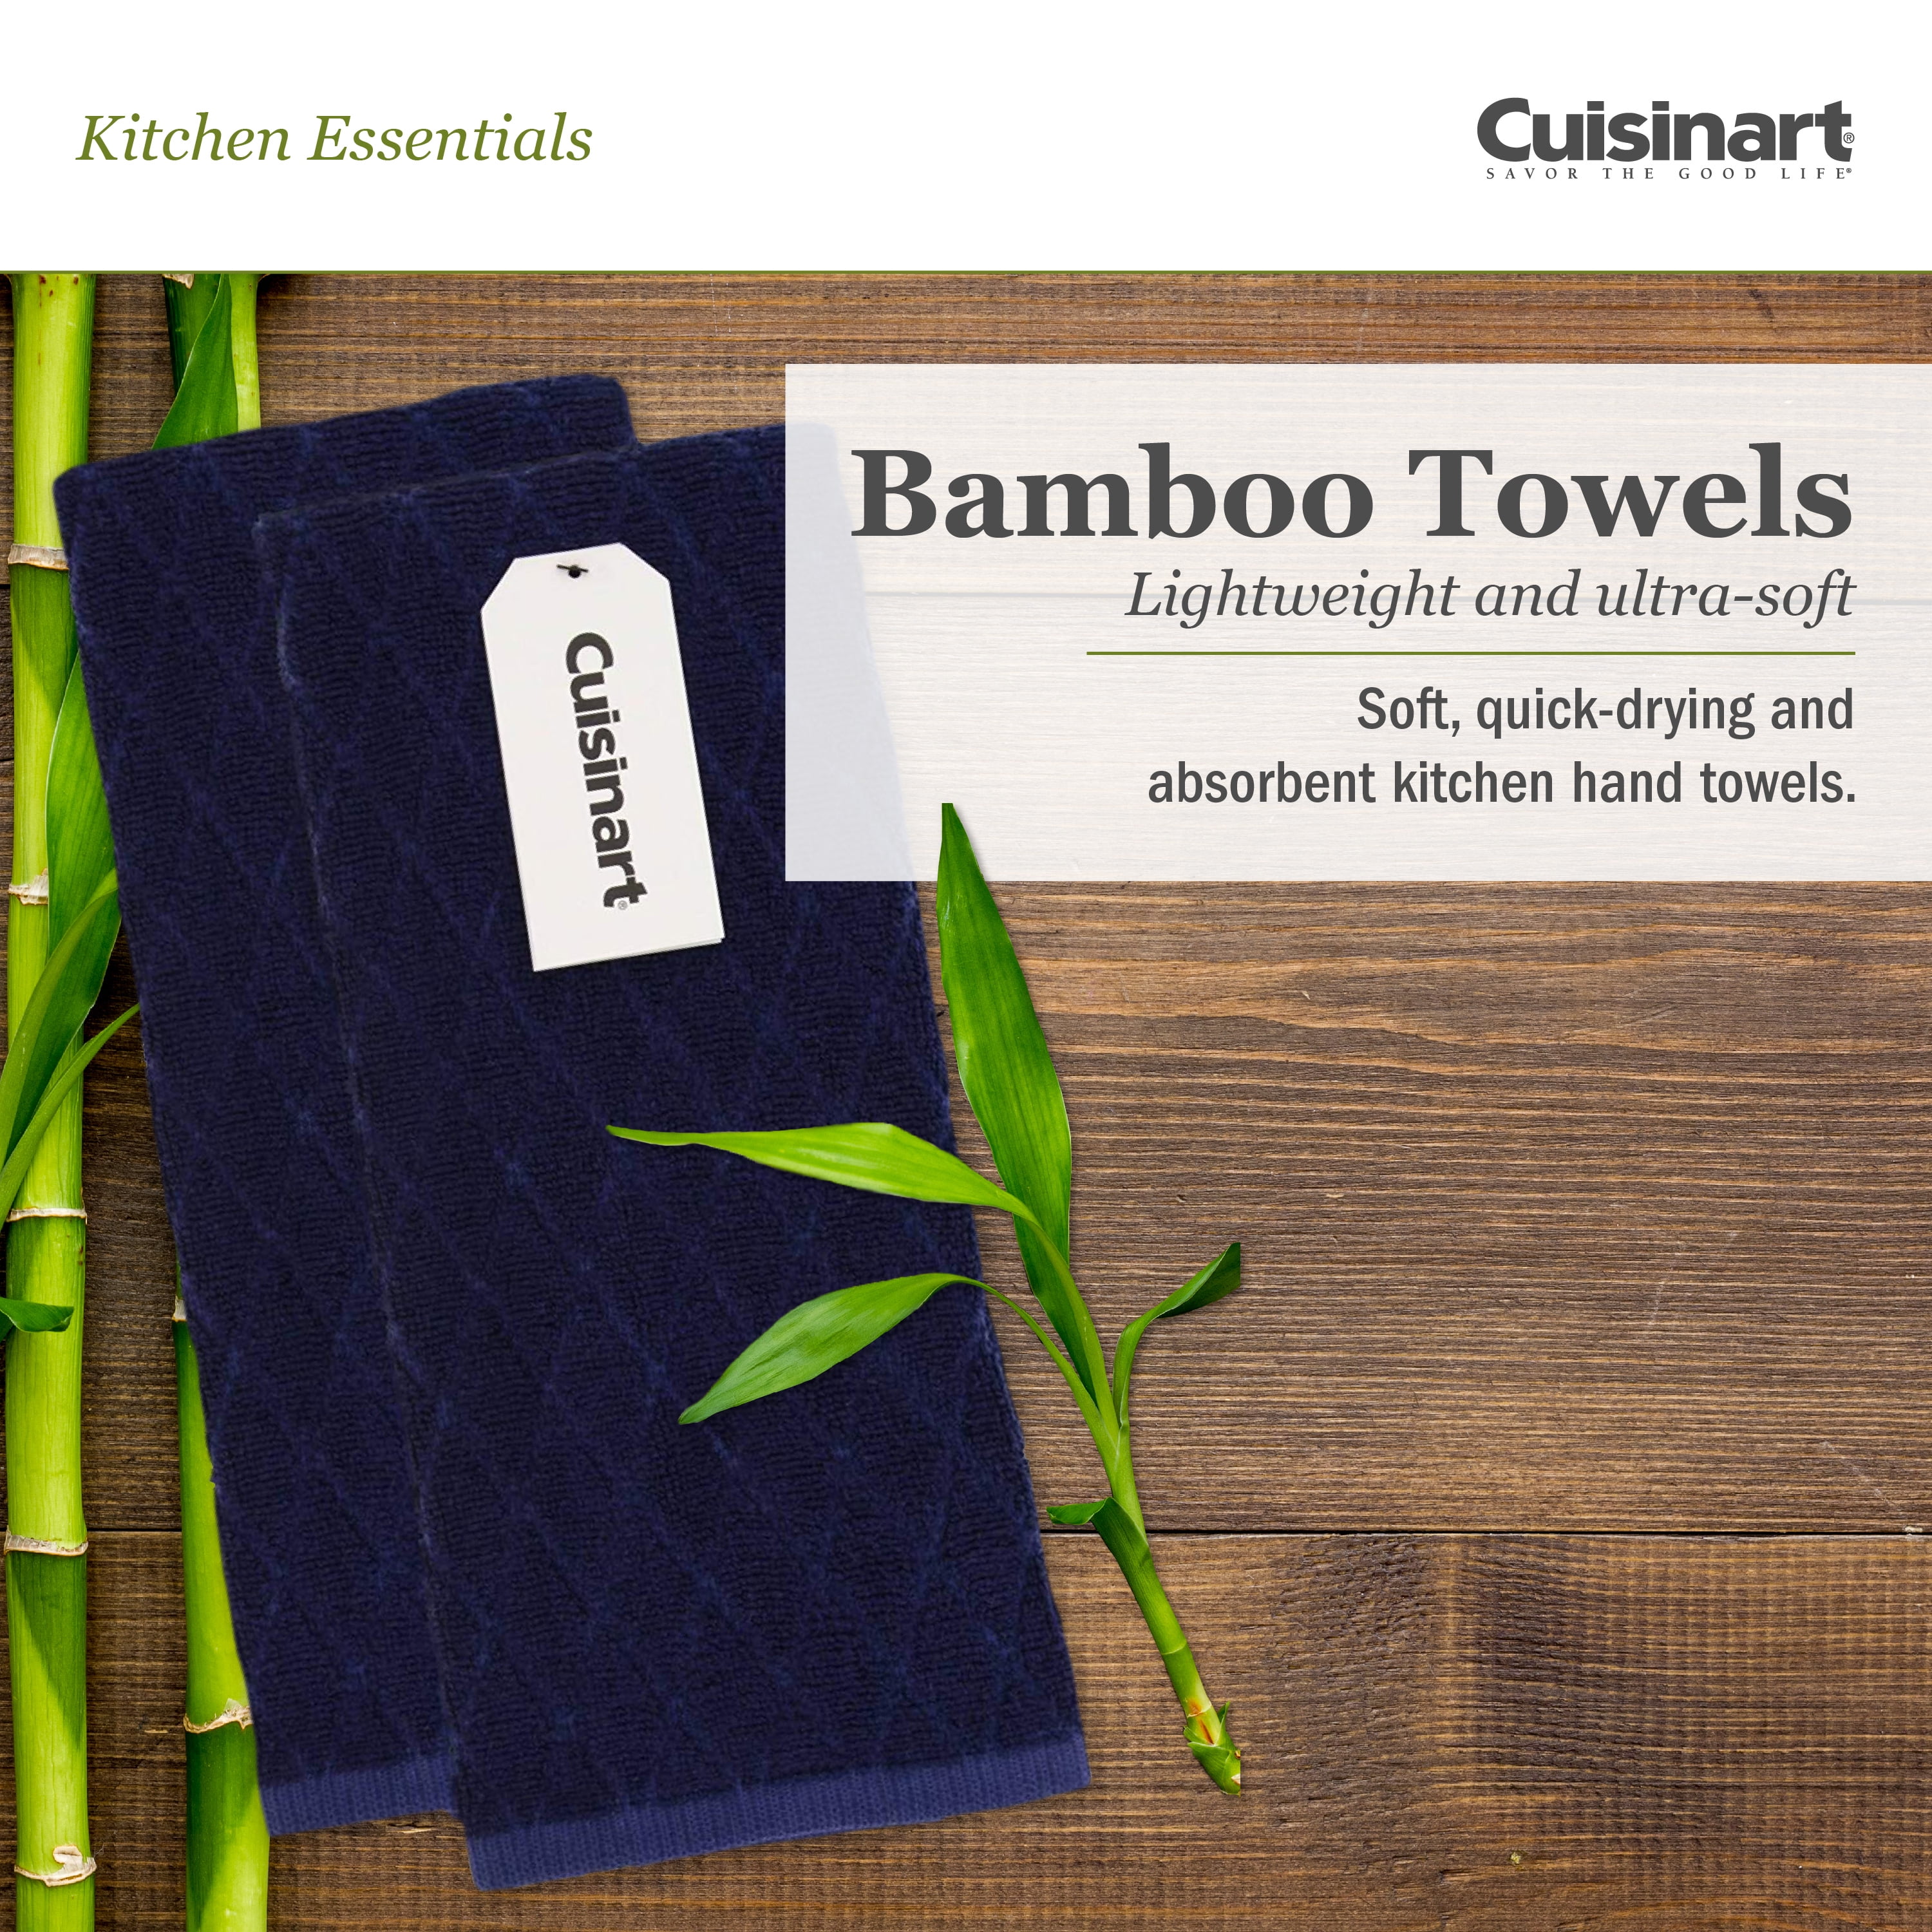 Cuisinart Chubby Stripe Bamboo Kitchen Towels, 2pk, 16 x 28Red